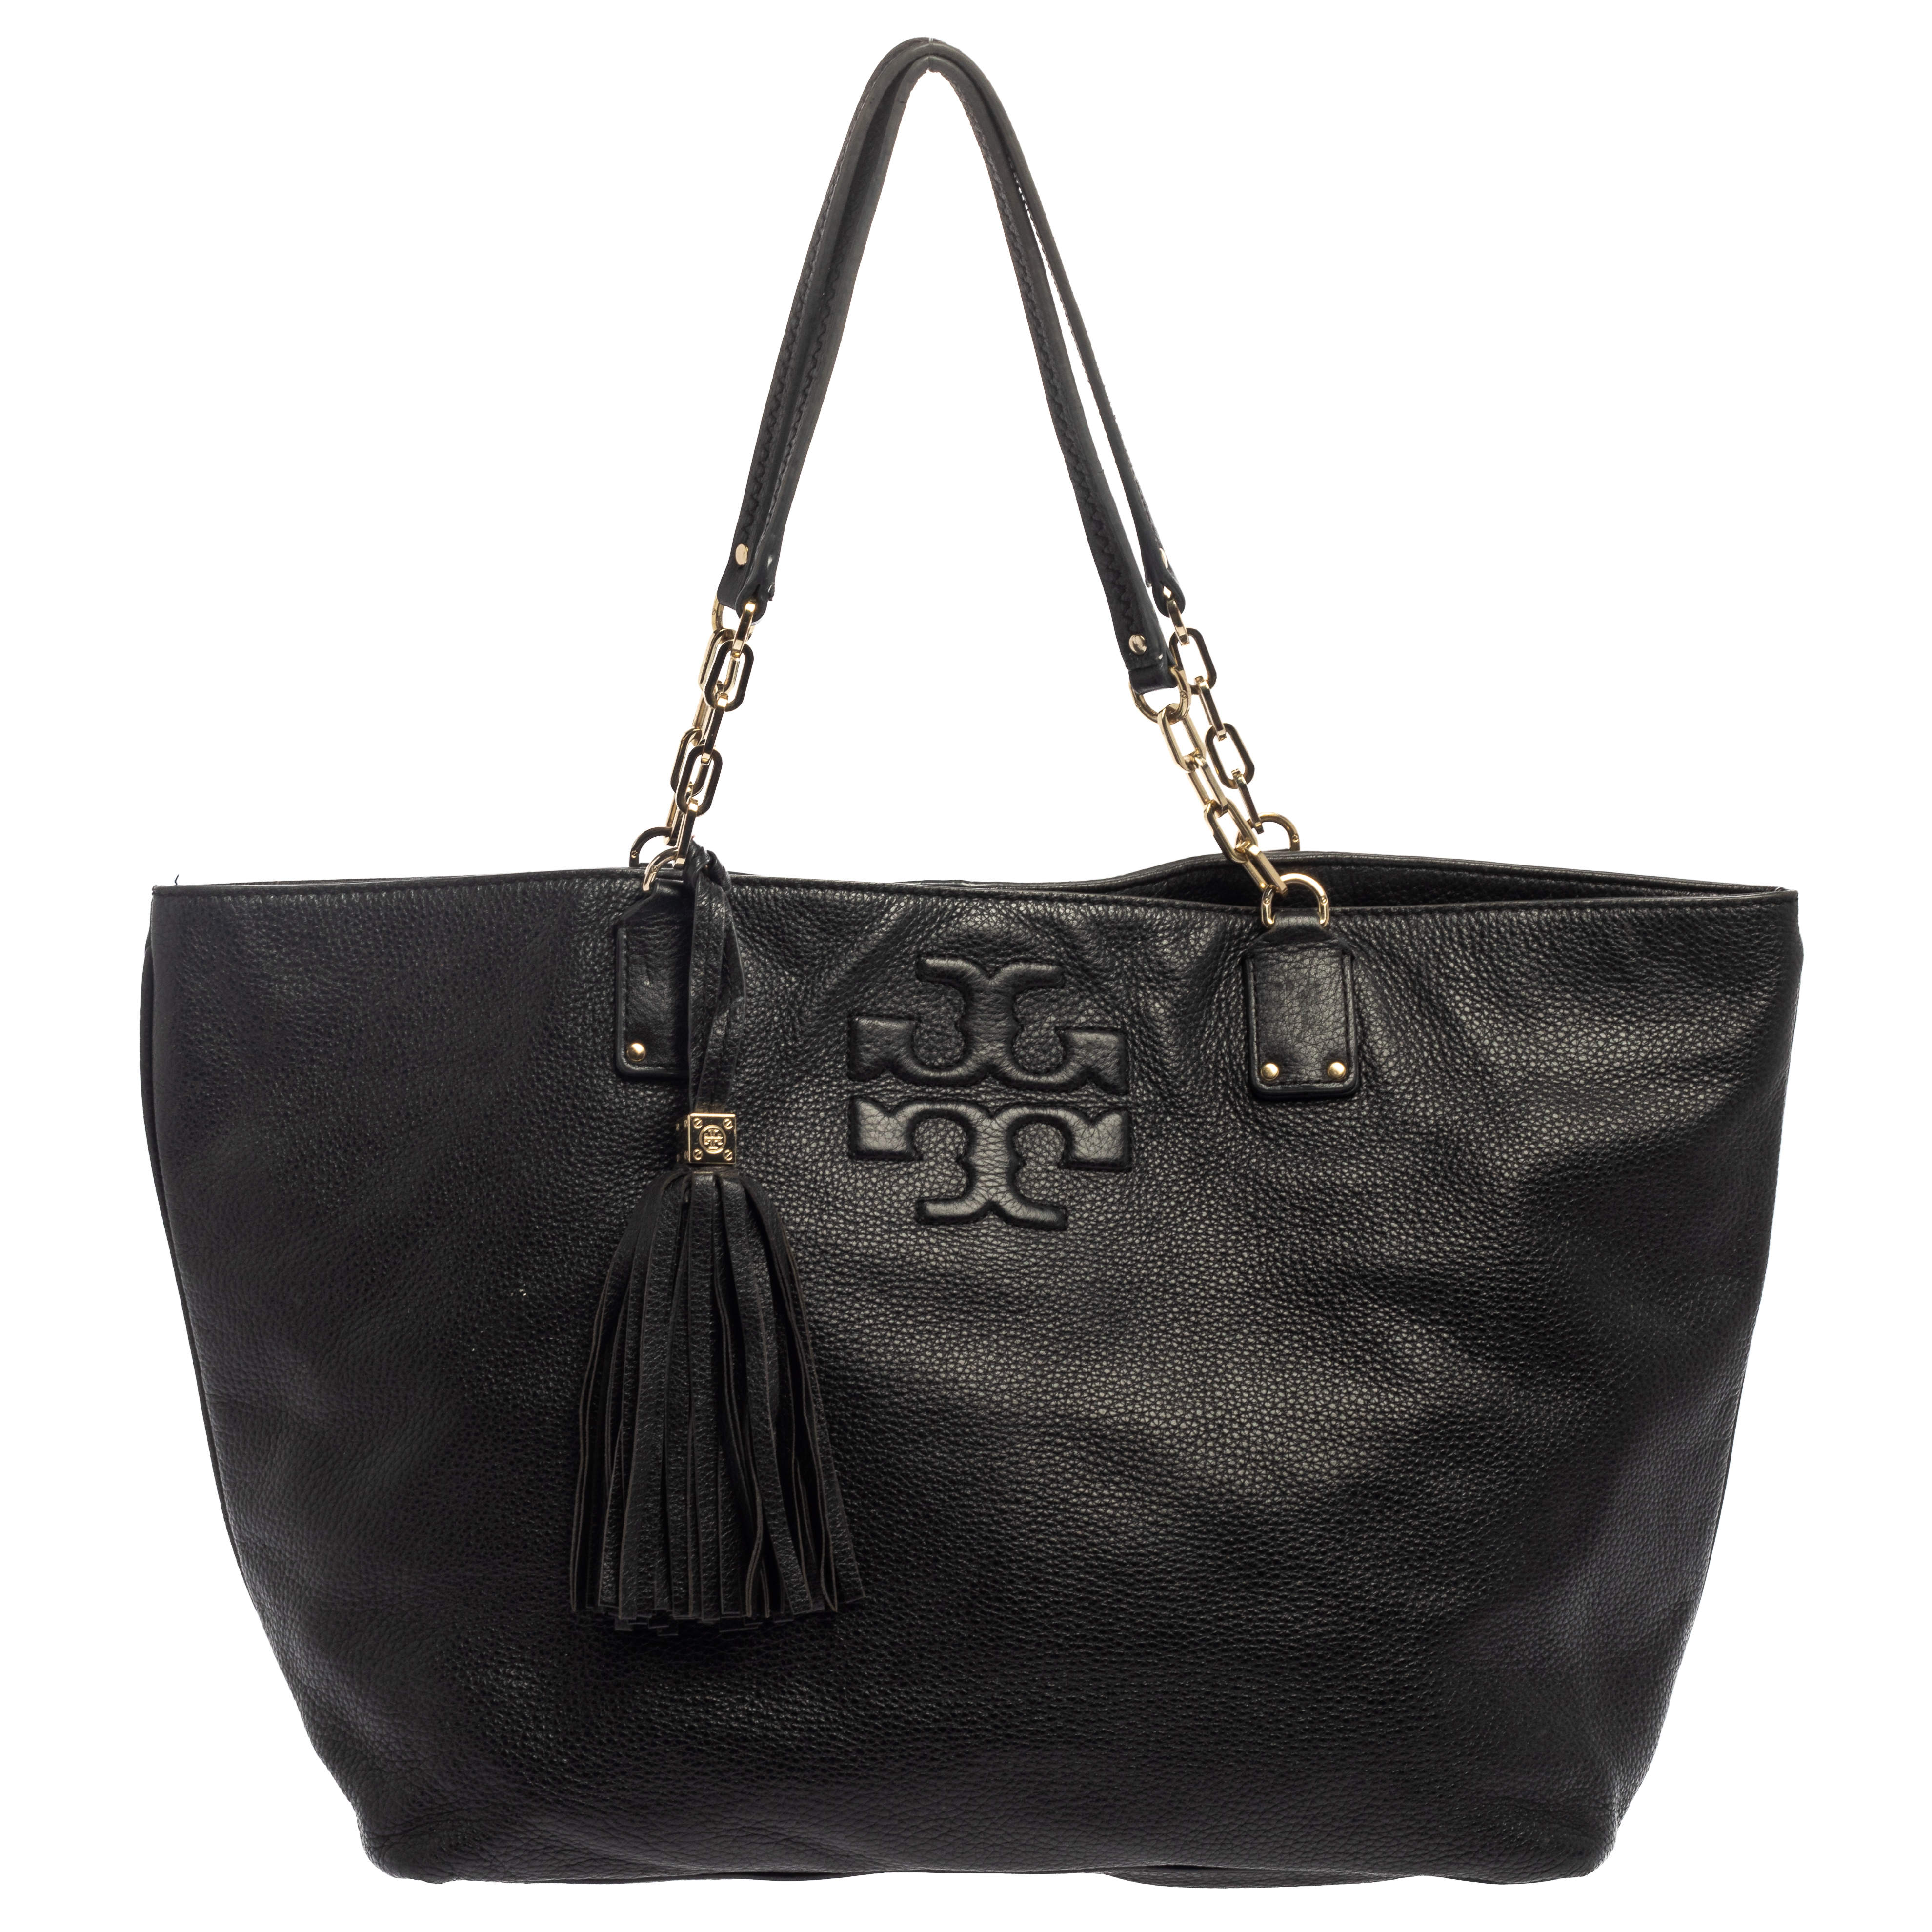 Tory Burch Black Leather Large Thea Tote Tory Burch | TLC